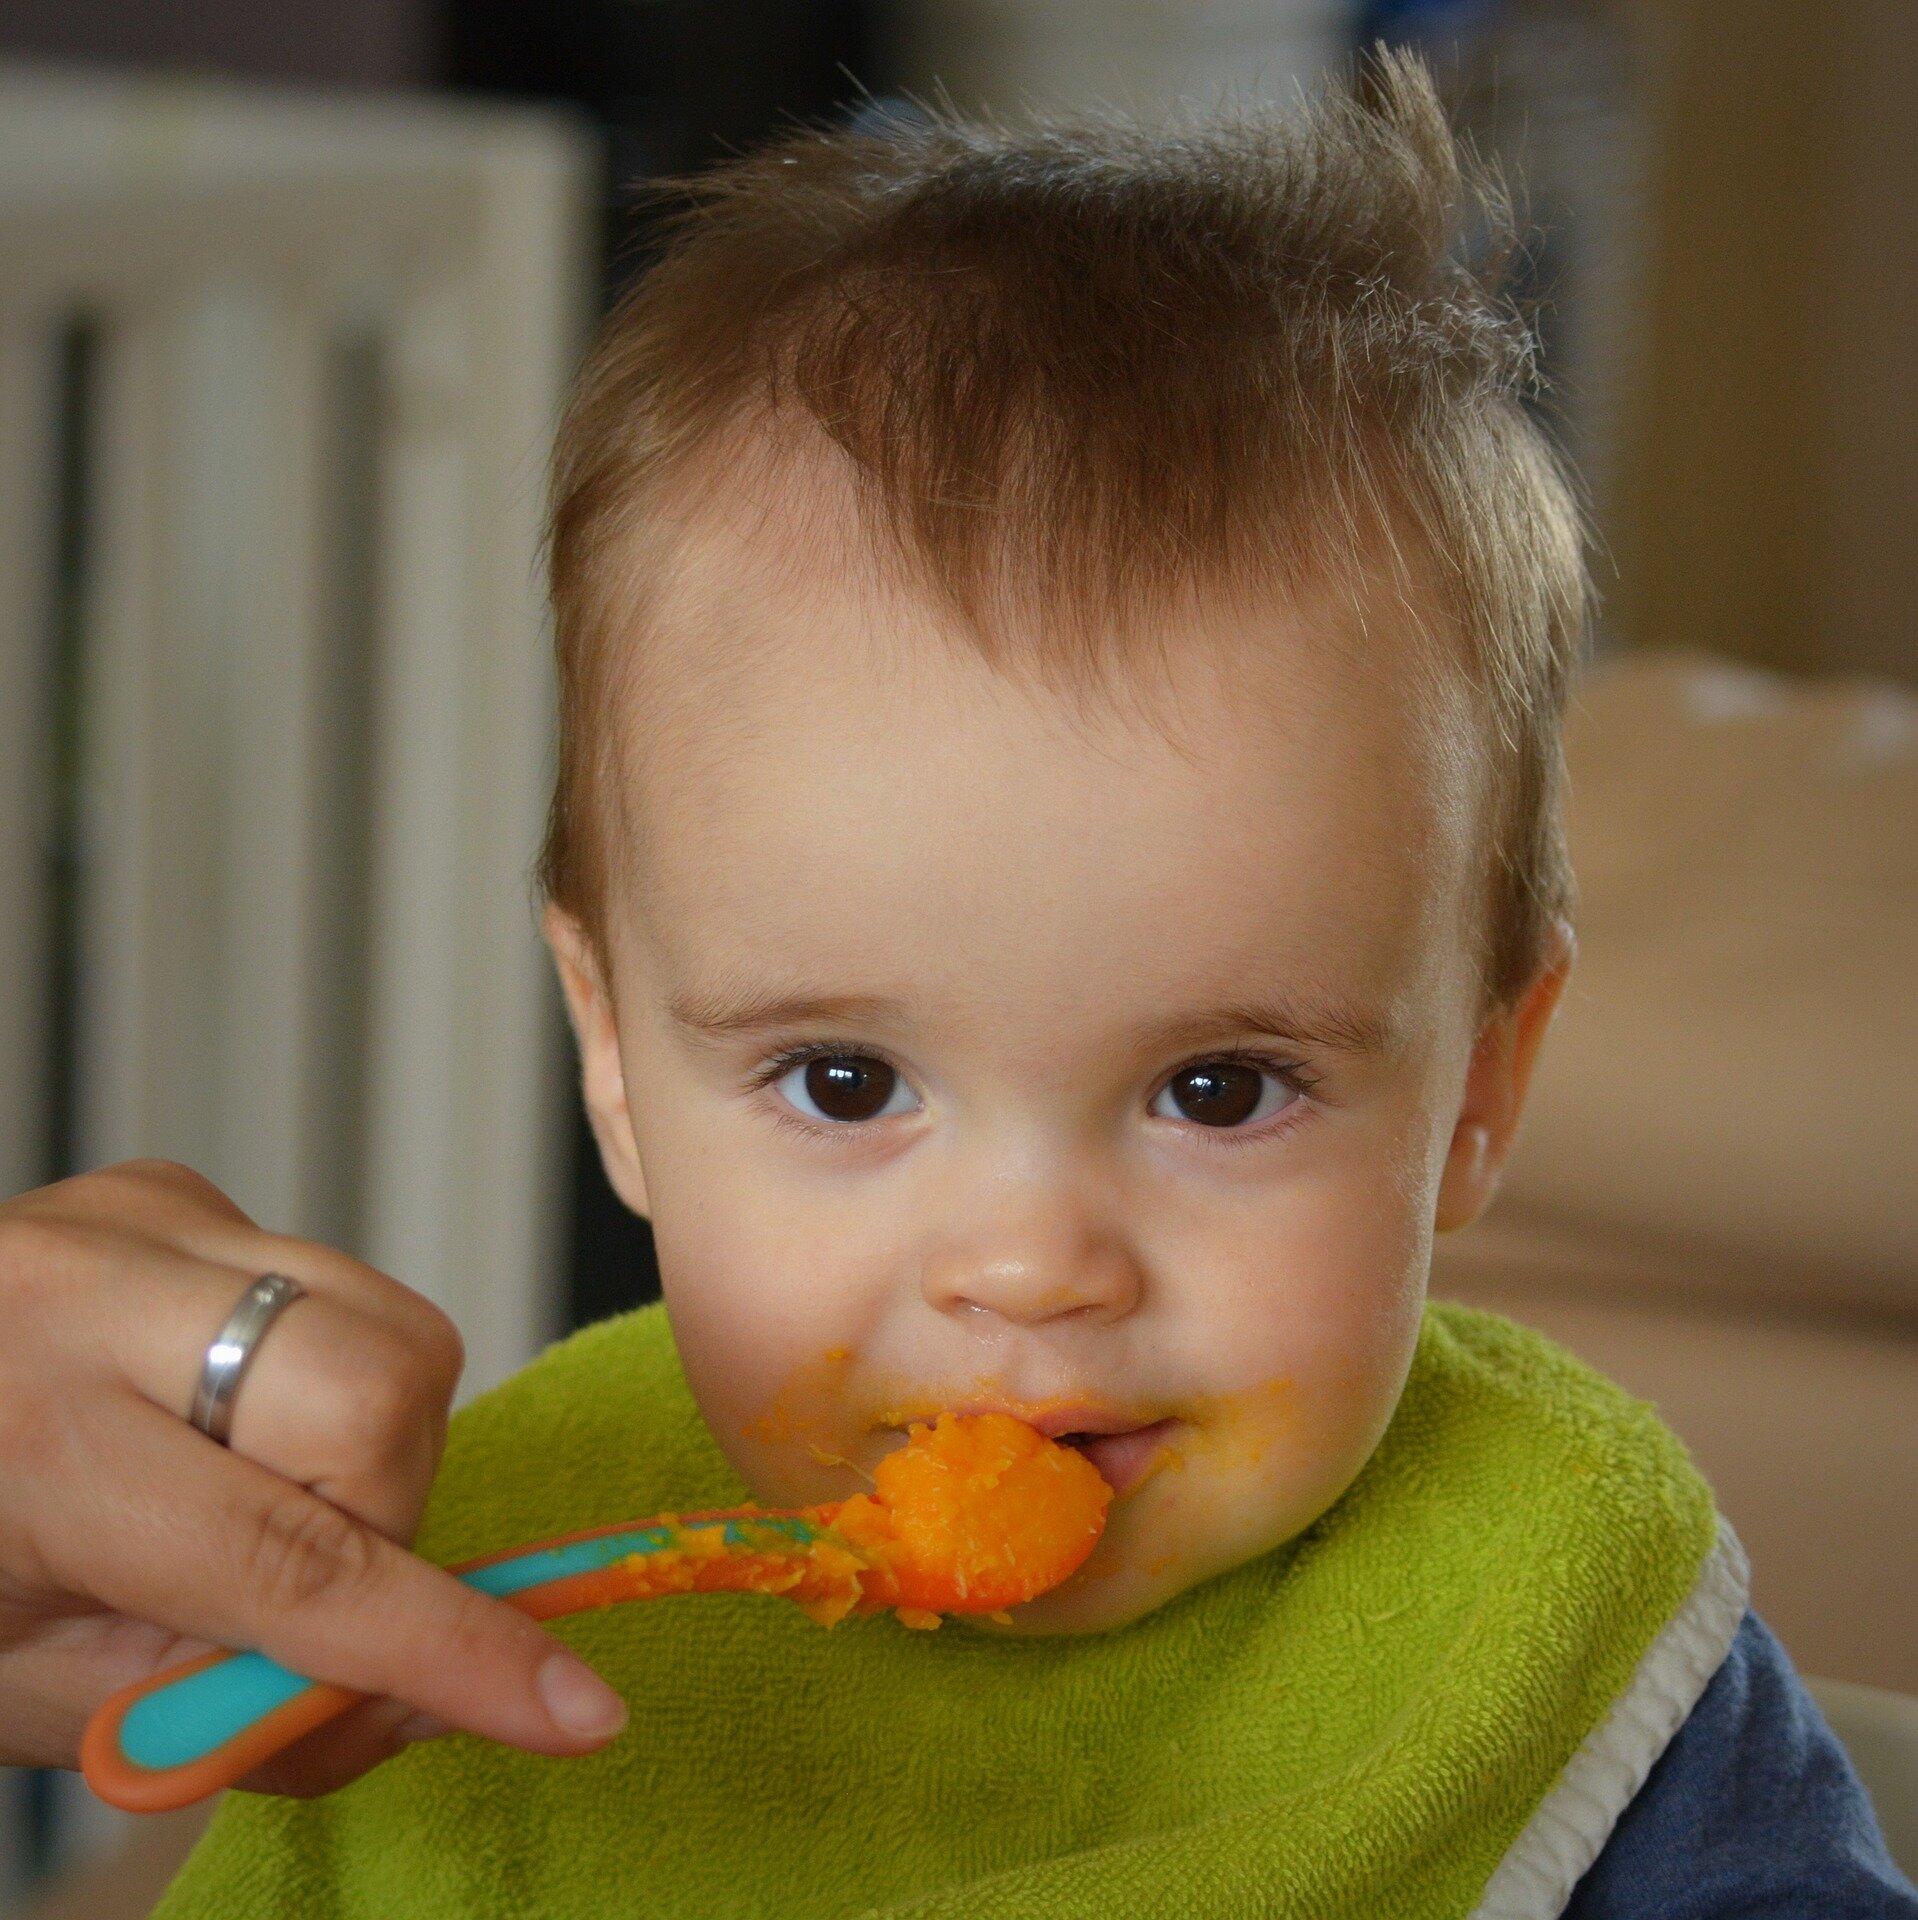 #Average of nine promotional claims on packaging of UK baby food products: study